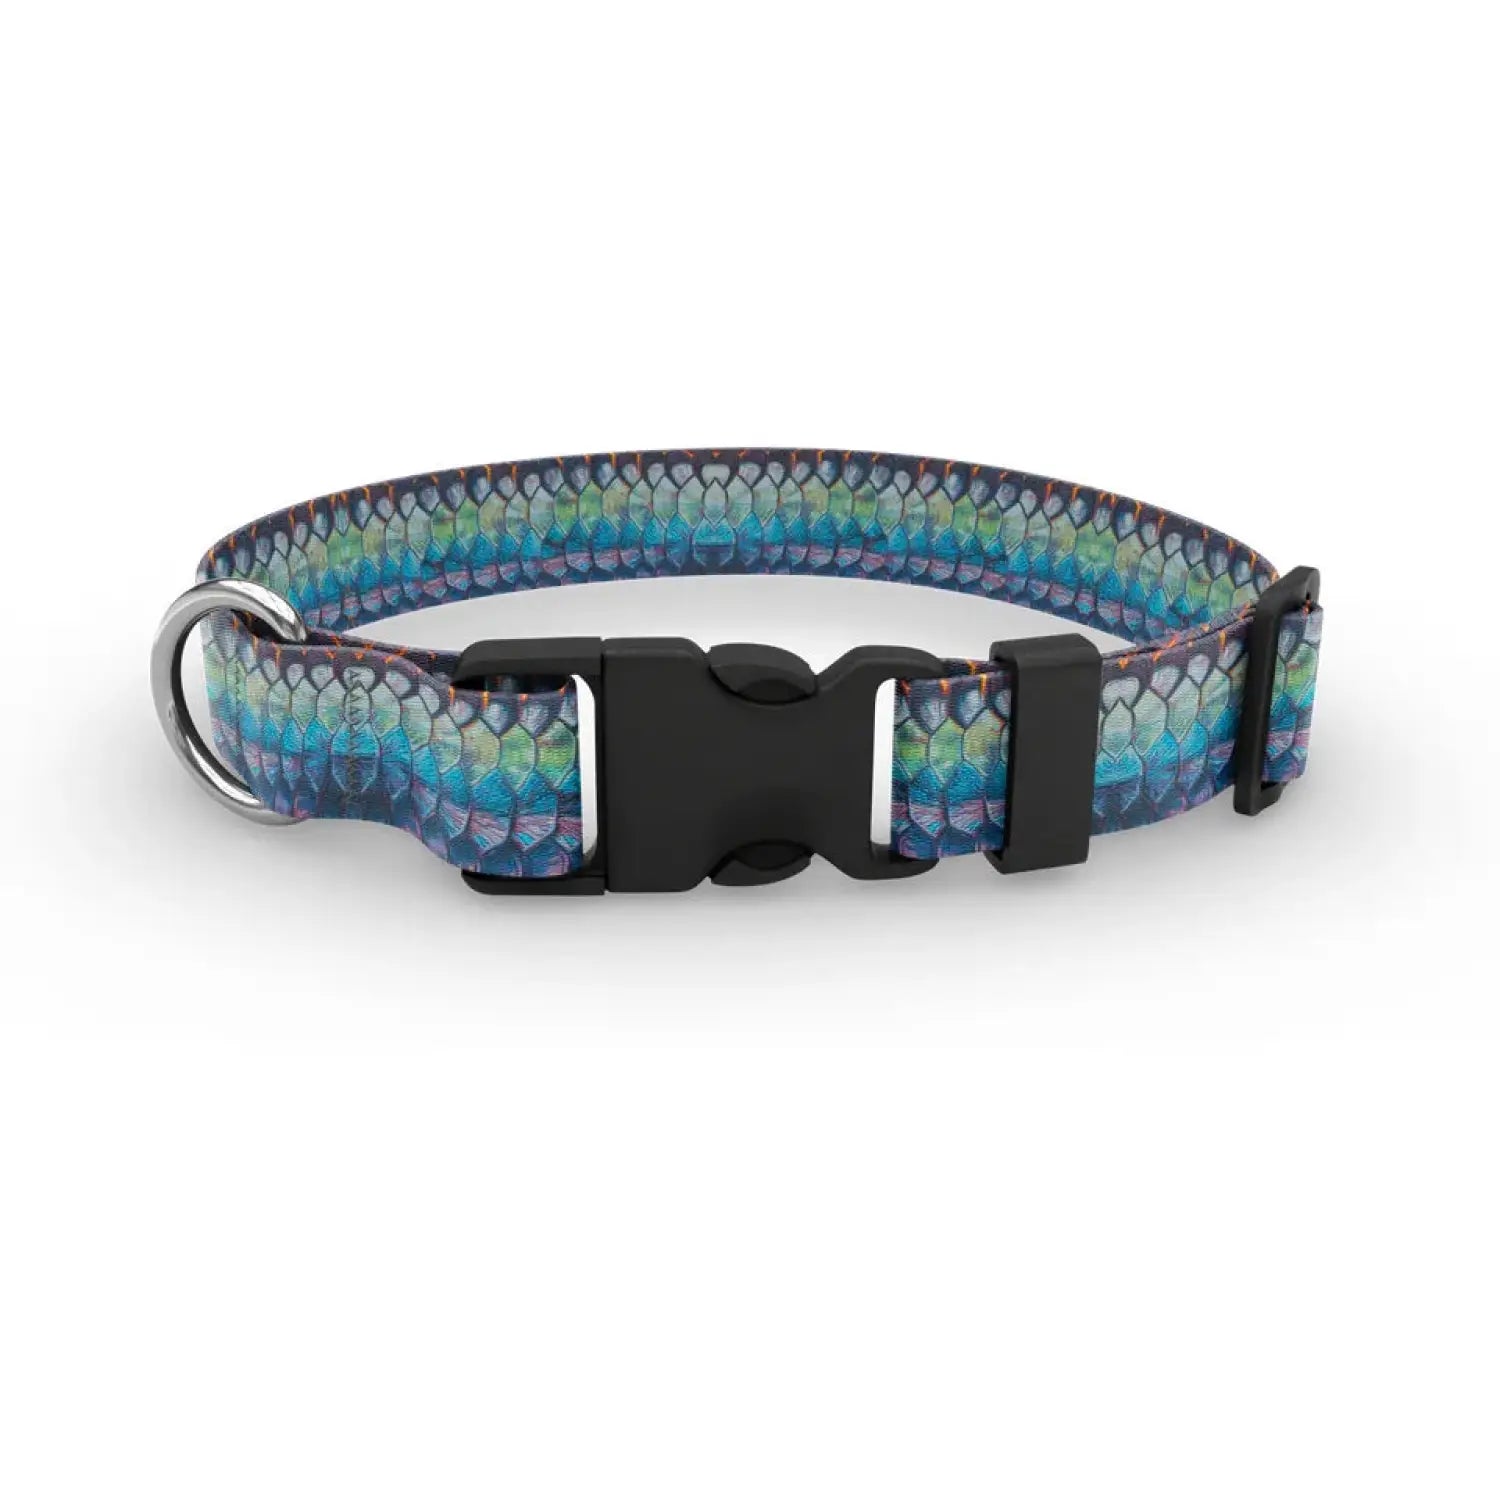 Wingo Outdoors Dog Collar in DeYoung Tarpon design. Pastel purples, blues, and aquas. With black buckle and silver D ring.